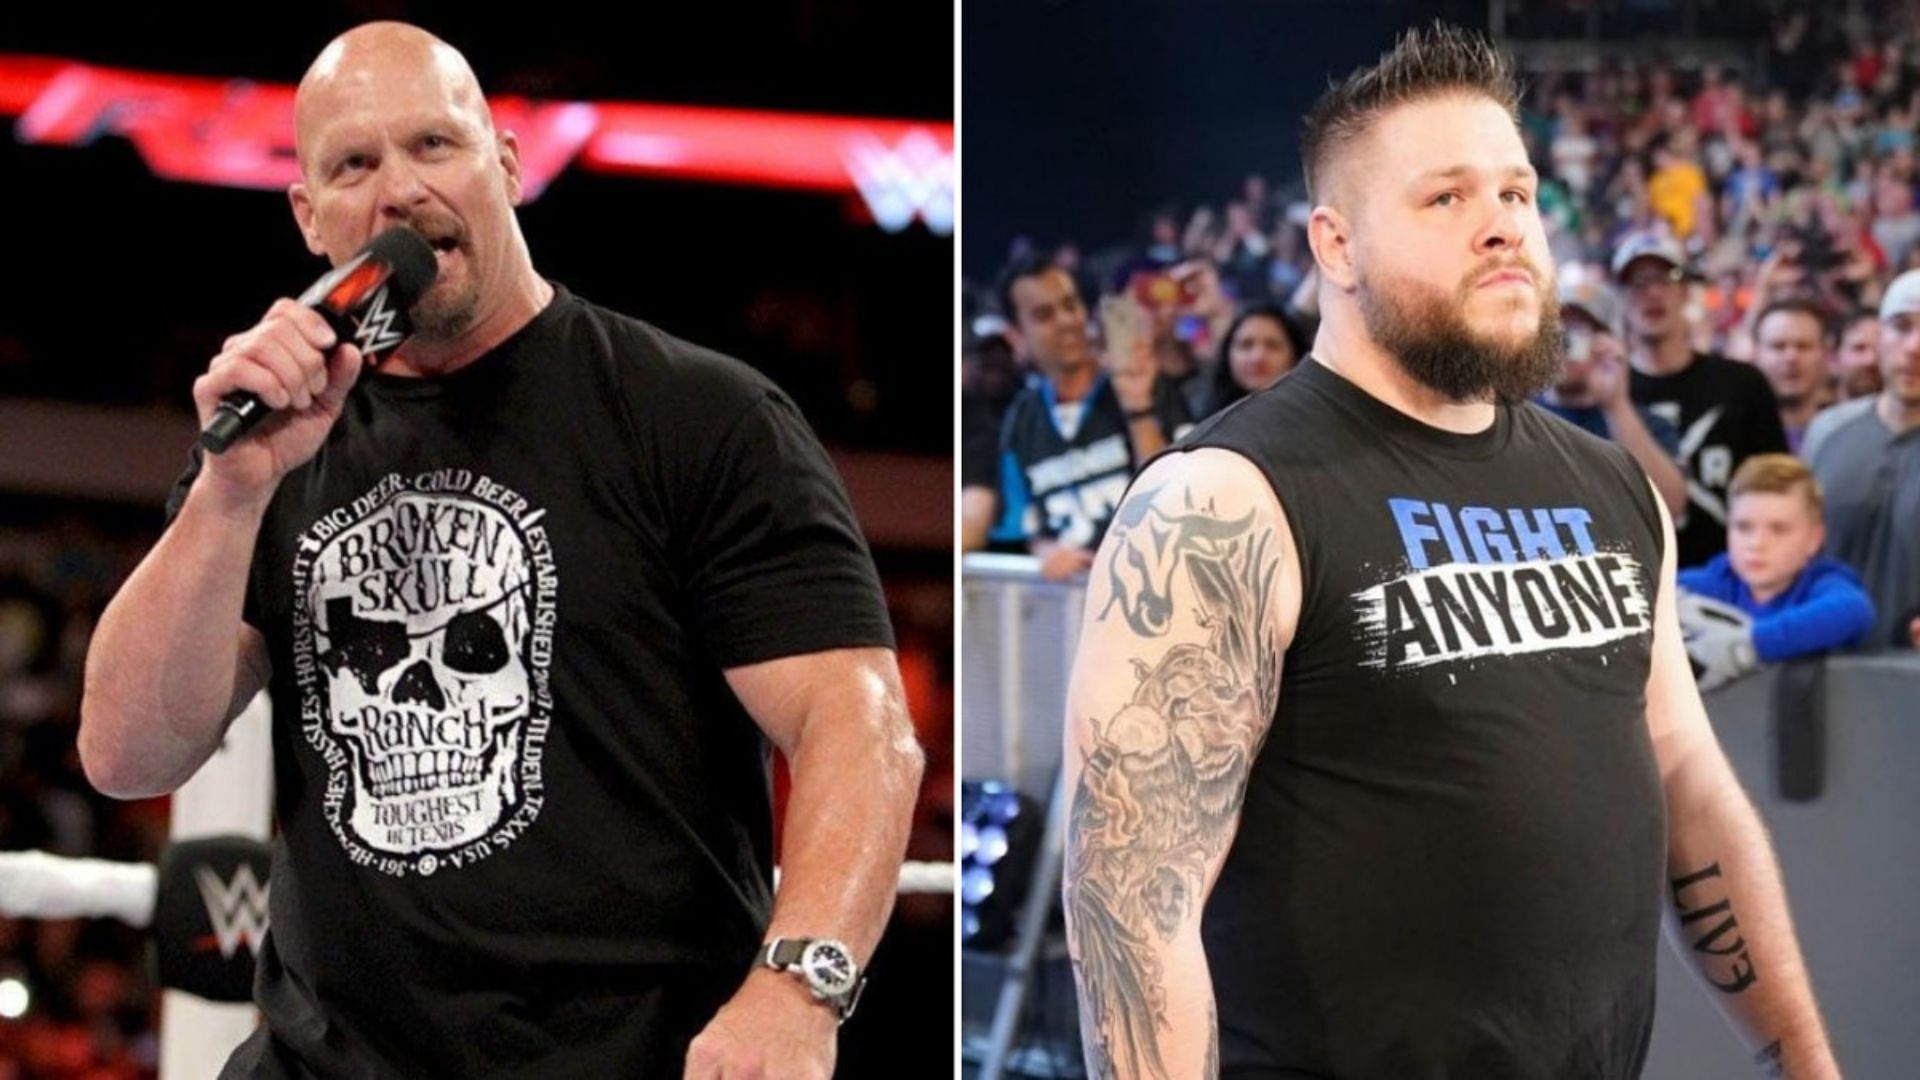 Stone Cold Steve Austin has been invited to Wrestlemania by Kevin Owens